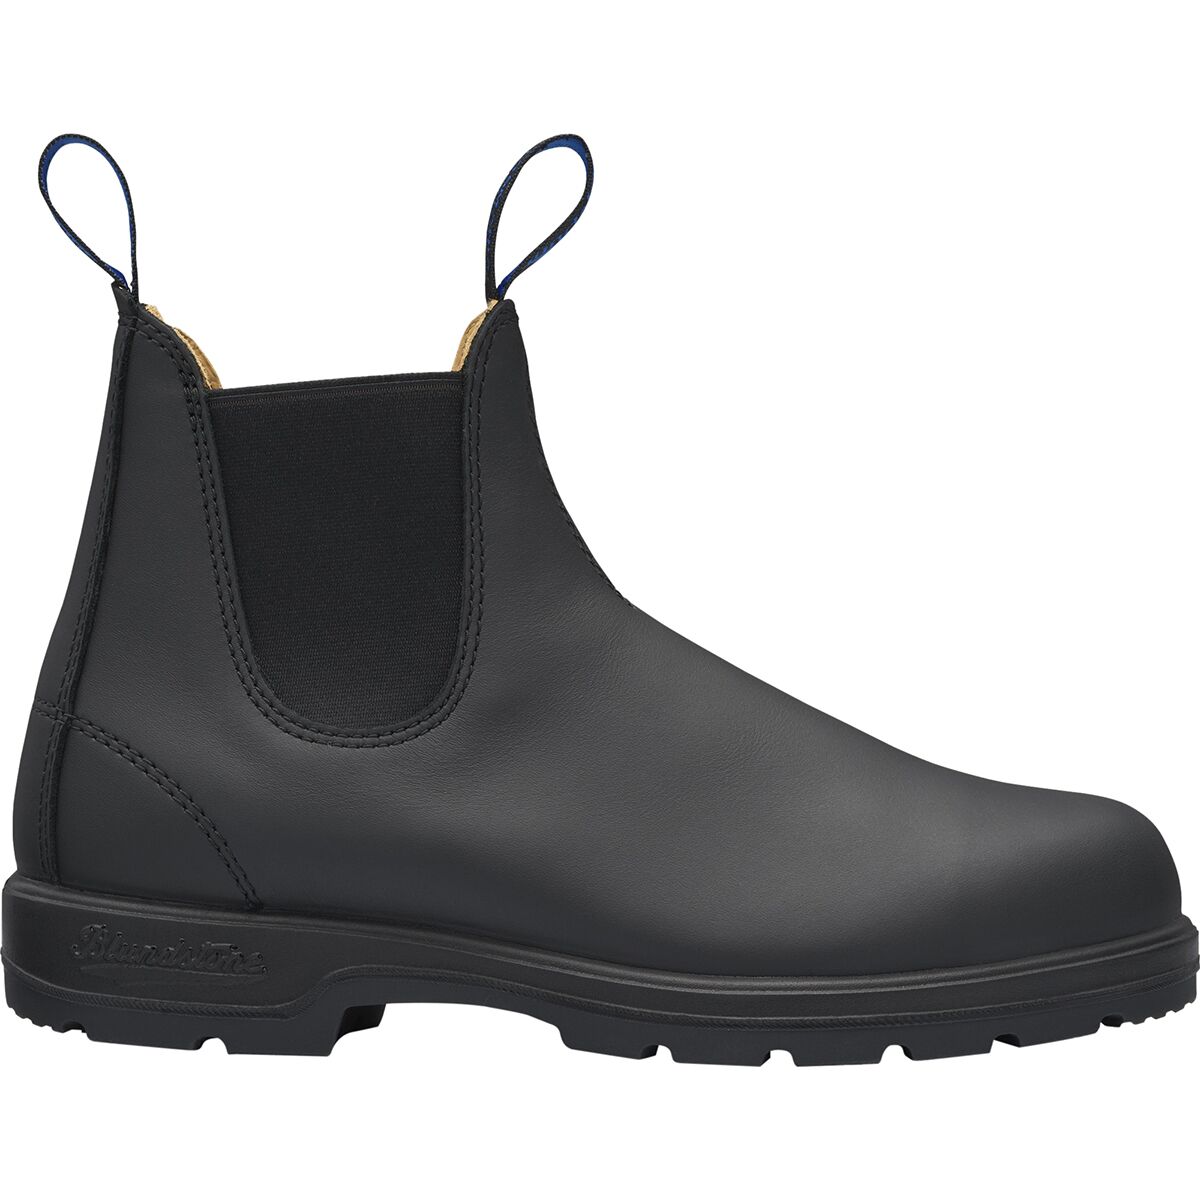 Blundstone Thermal Boot - Women's 